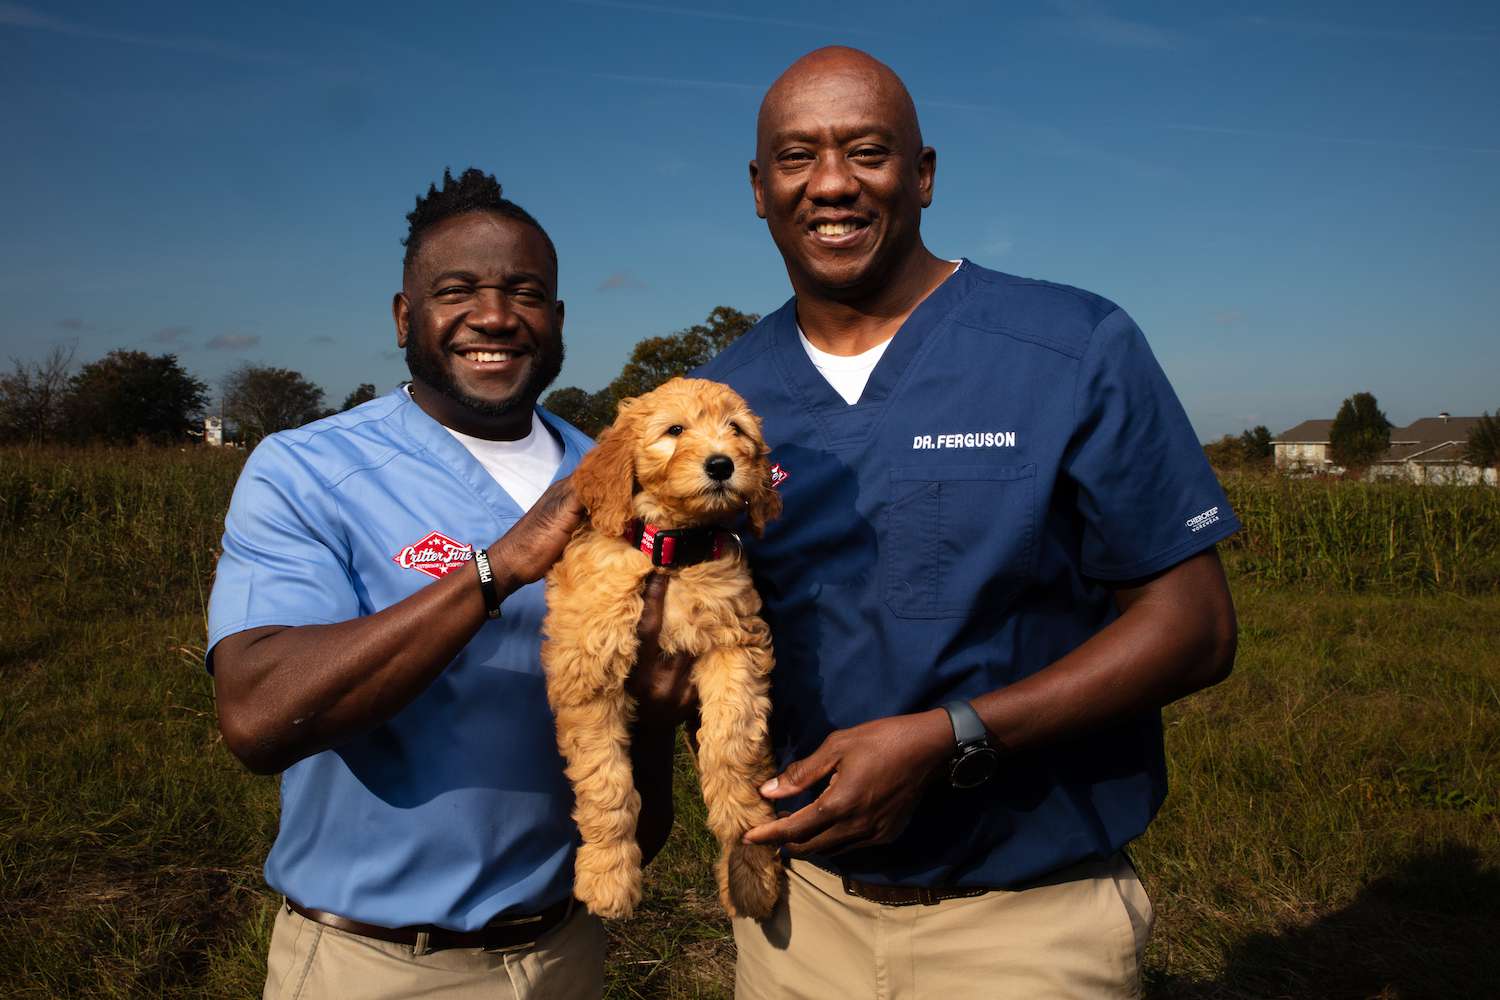 Drs. Vernard Hodges and Terrence Ferguson are two longtime friends who own and operate Critter Fixer Veterinary Hospital located south of Atlanta.